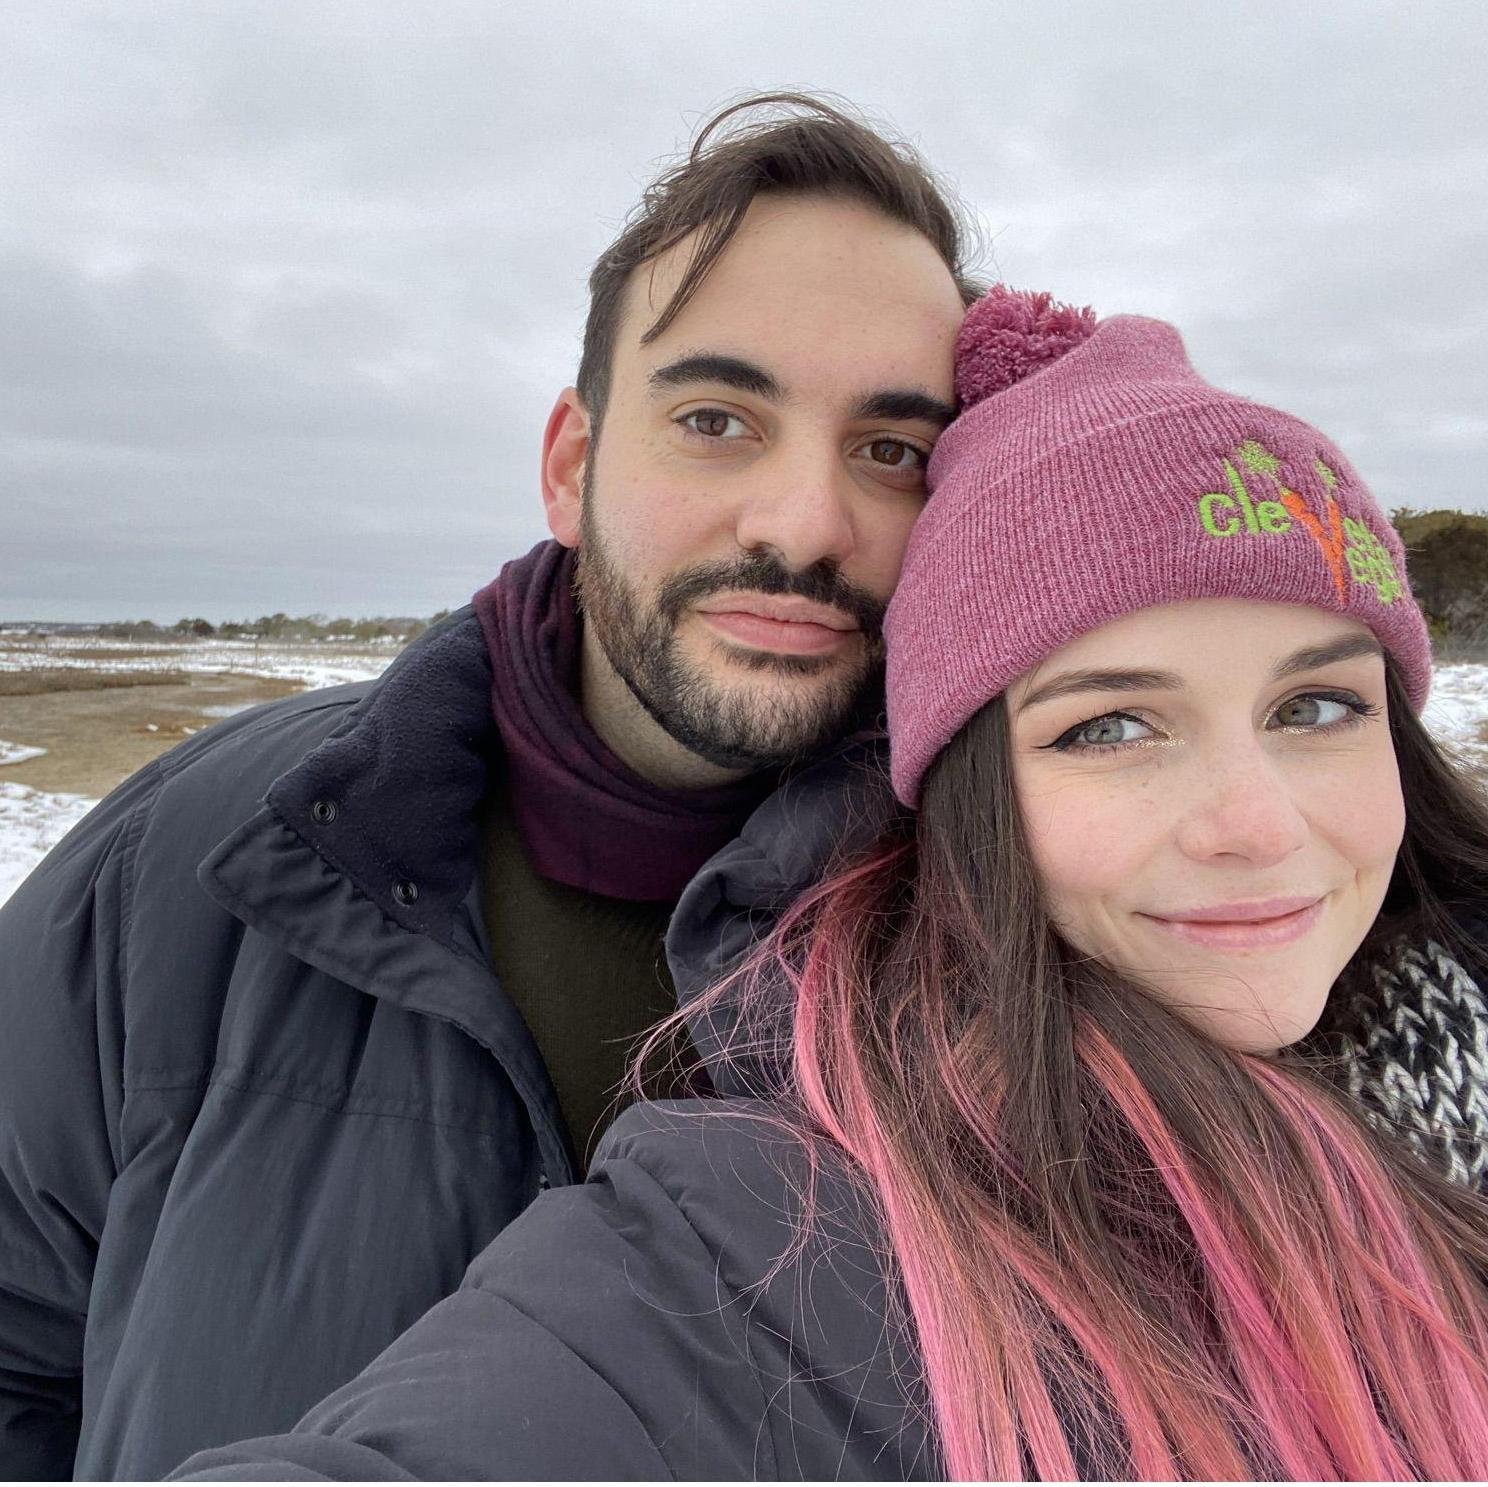 Our second Valentine's Day together in Cape Cod